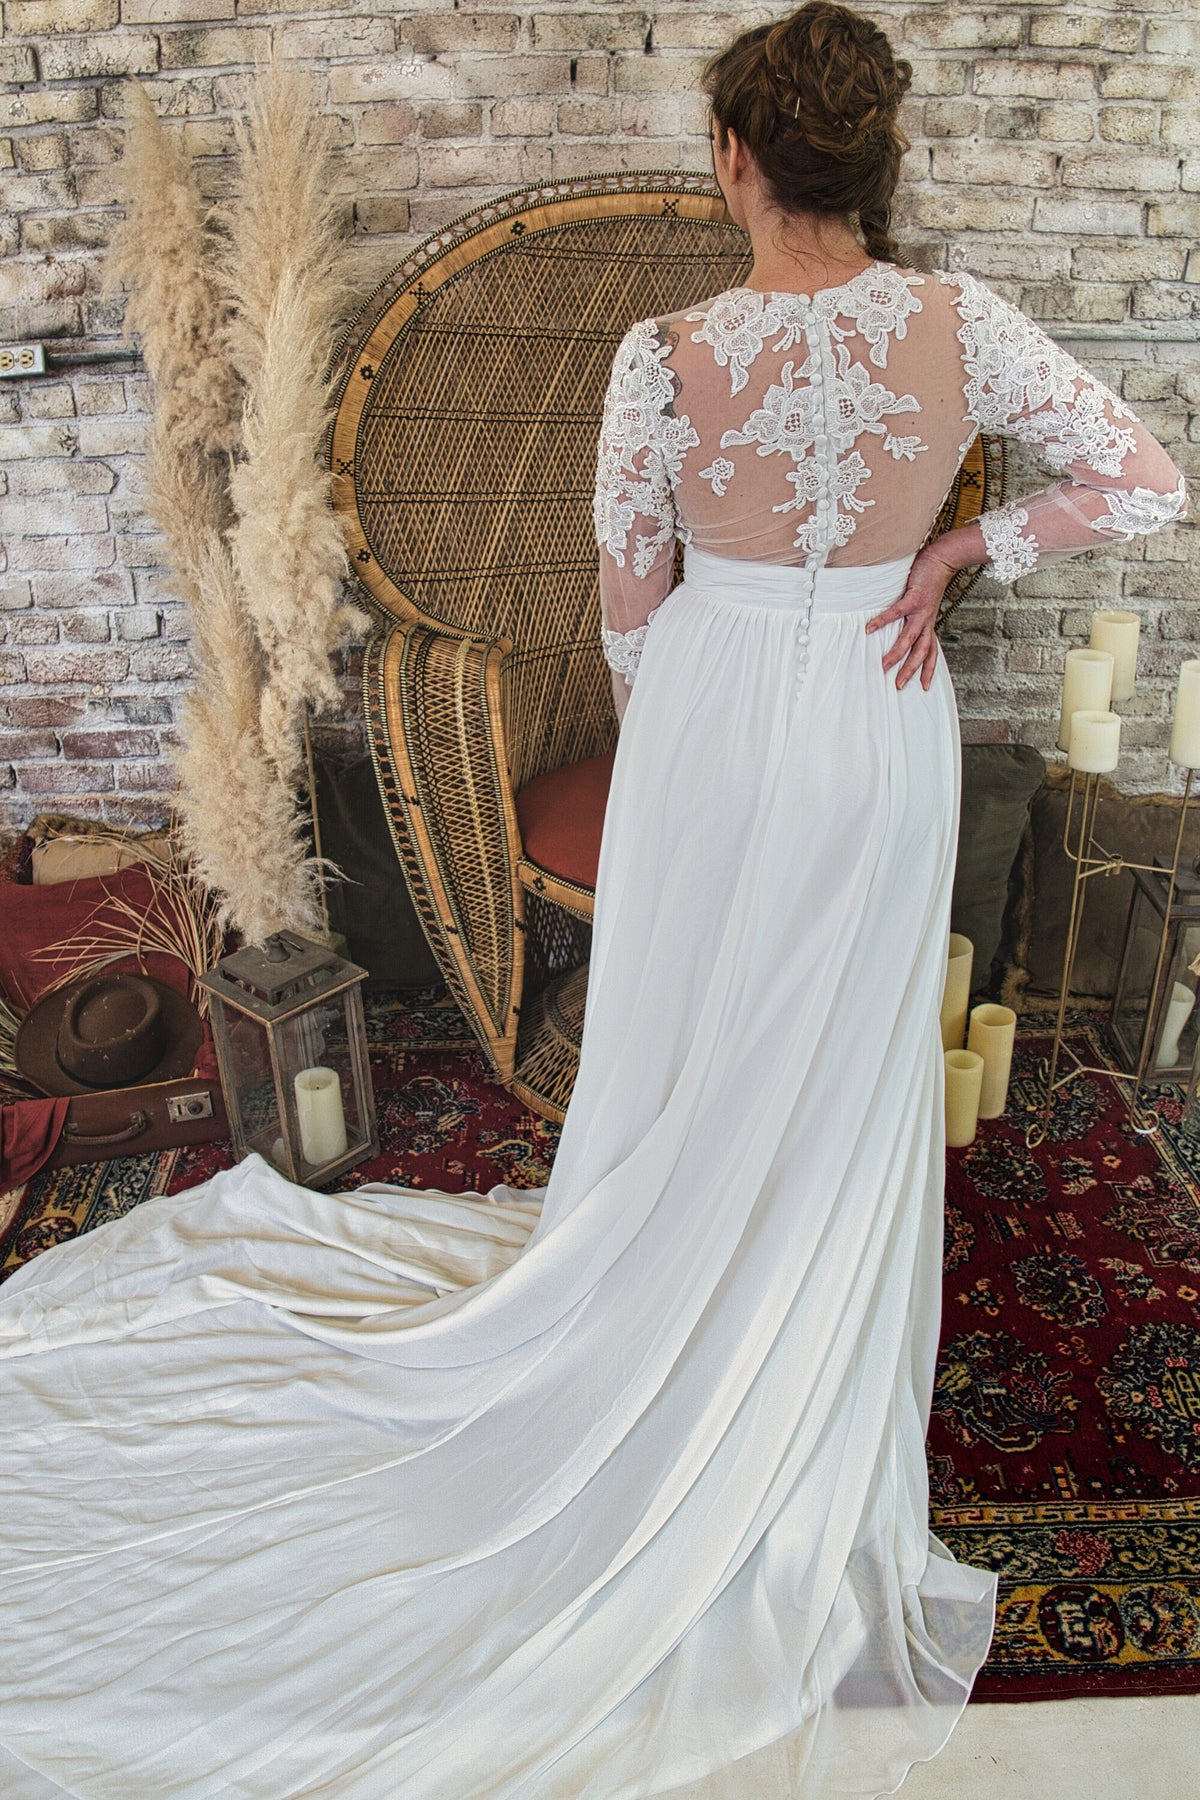 V-neck Chapel Train Long Illusion Sleeves Lace A Line Beach Wedding Dress Bridal Gown with Thigh Side Slit and Illusion Back Floral Sample